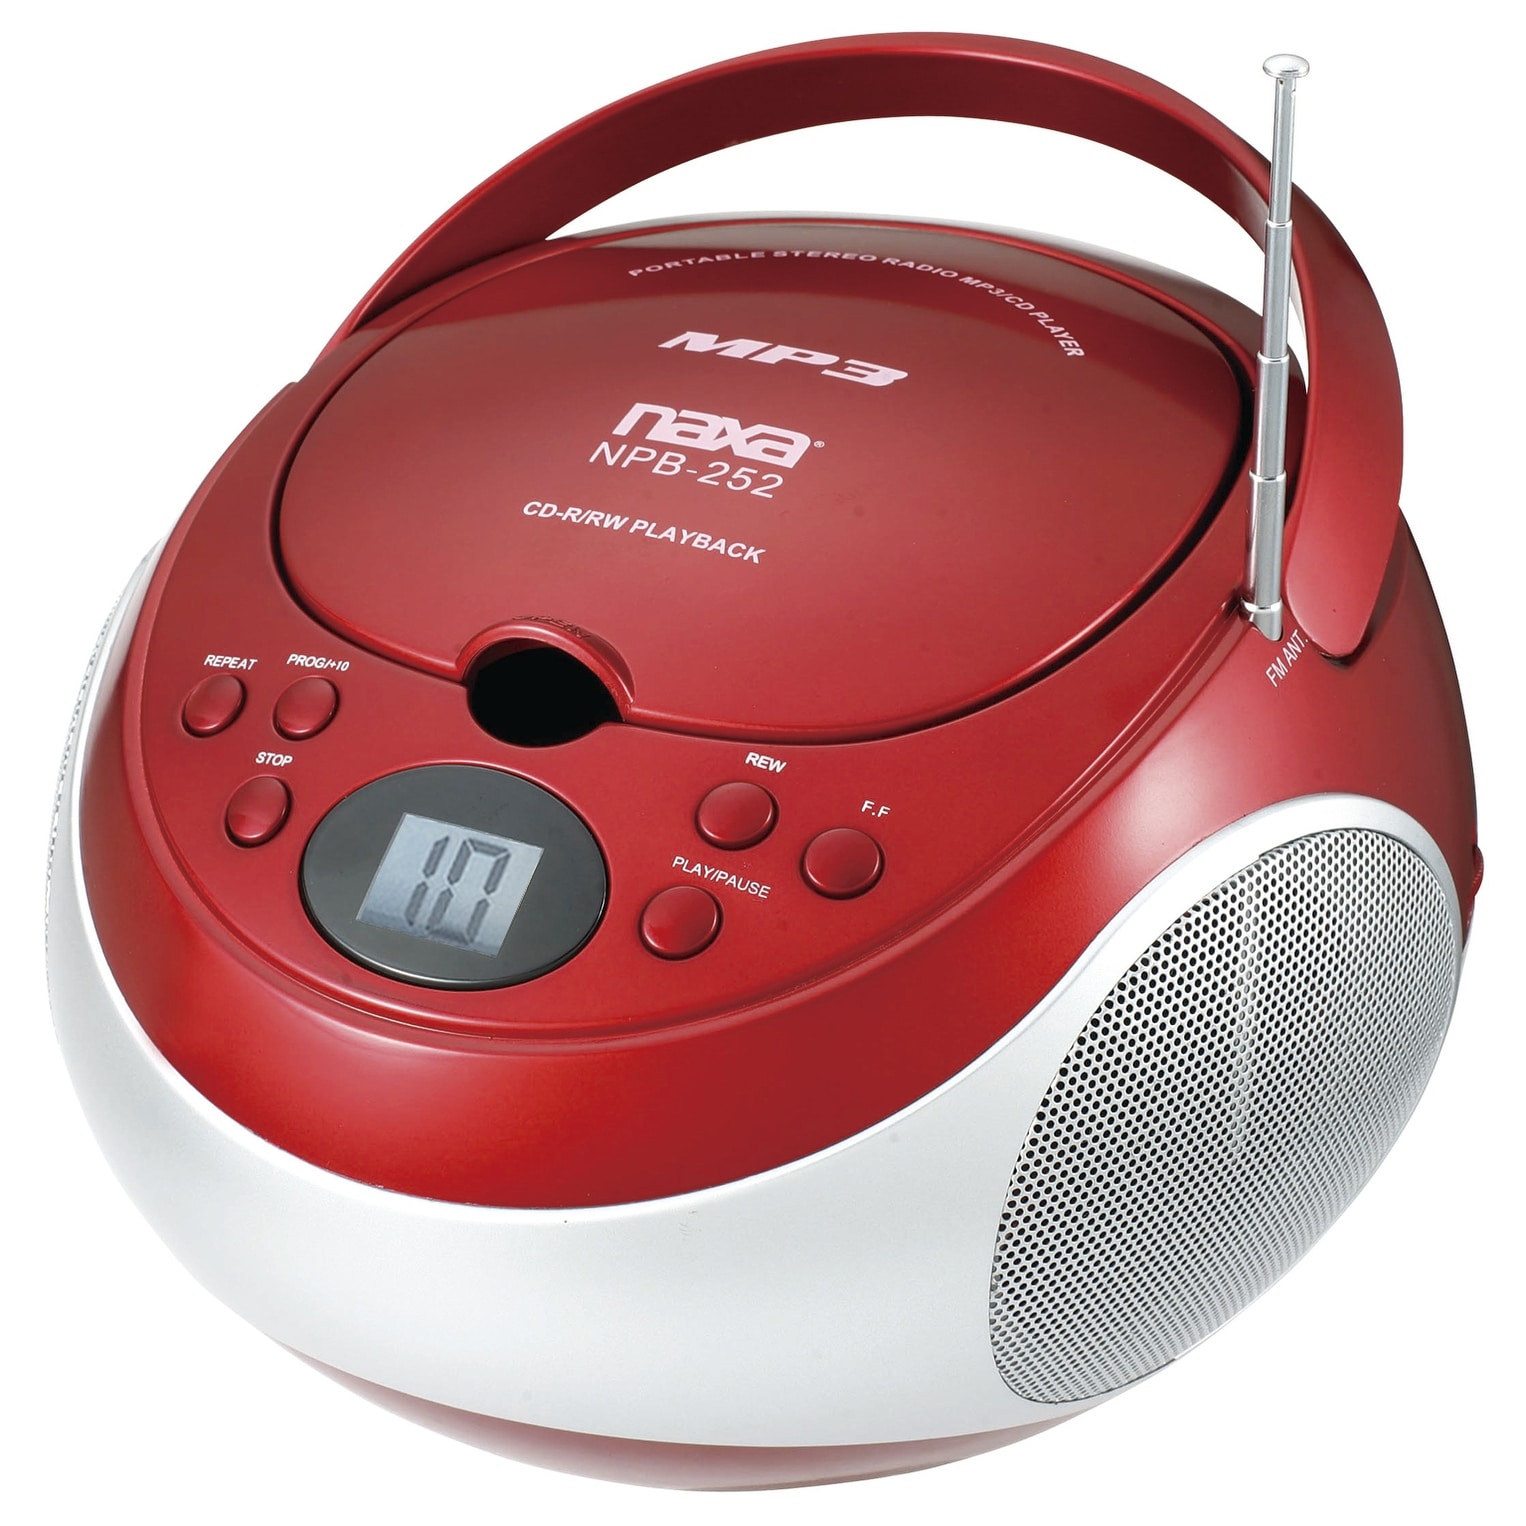 Portable MP3/CD Player with AM/FM Stereo Radio (NPB-252)